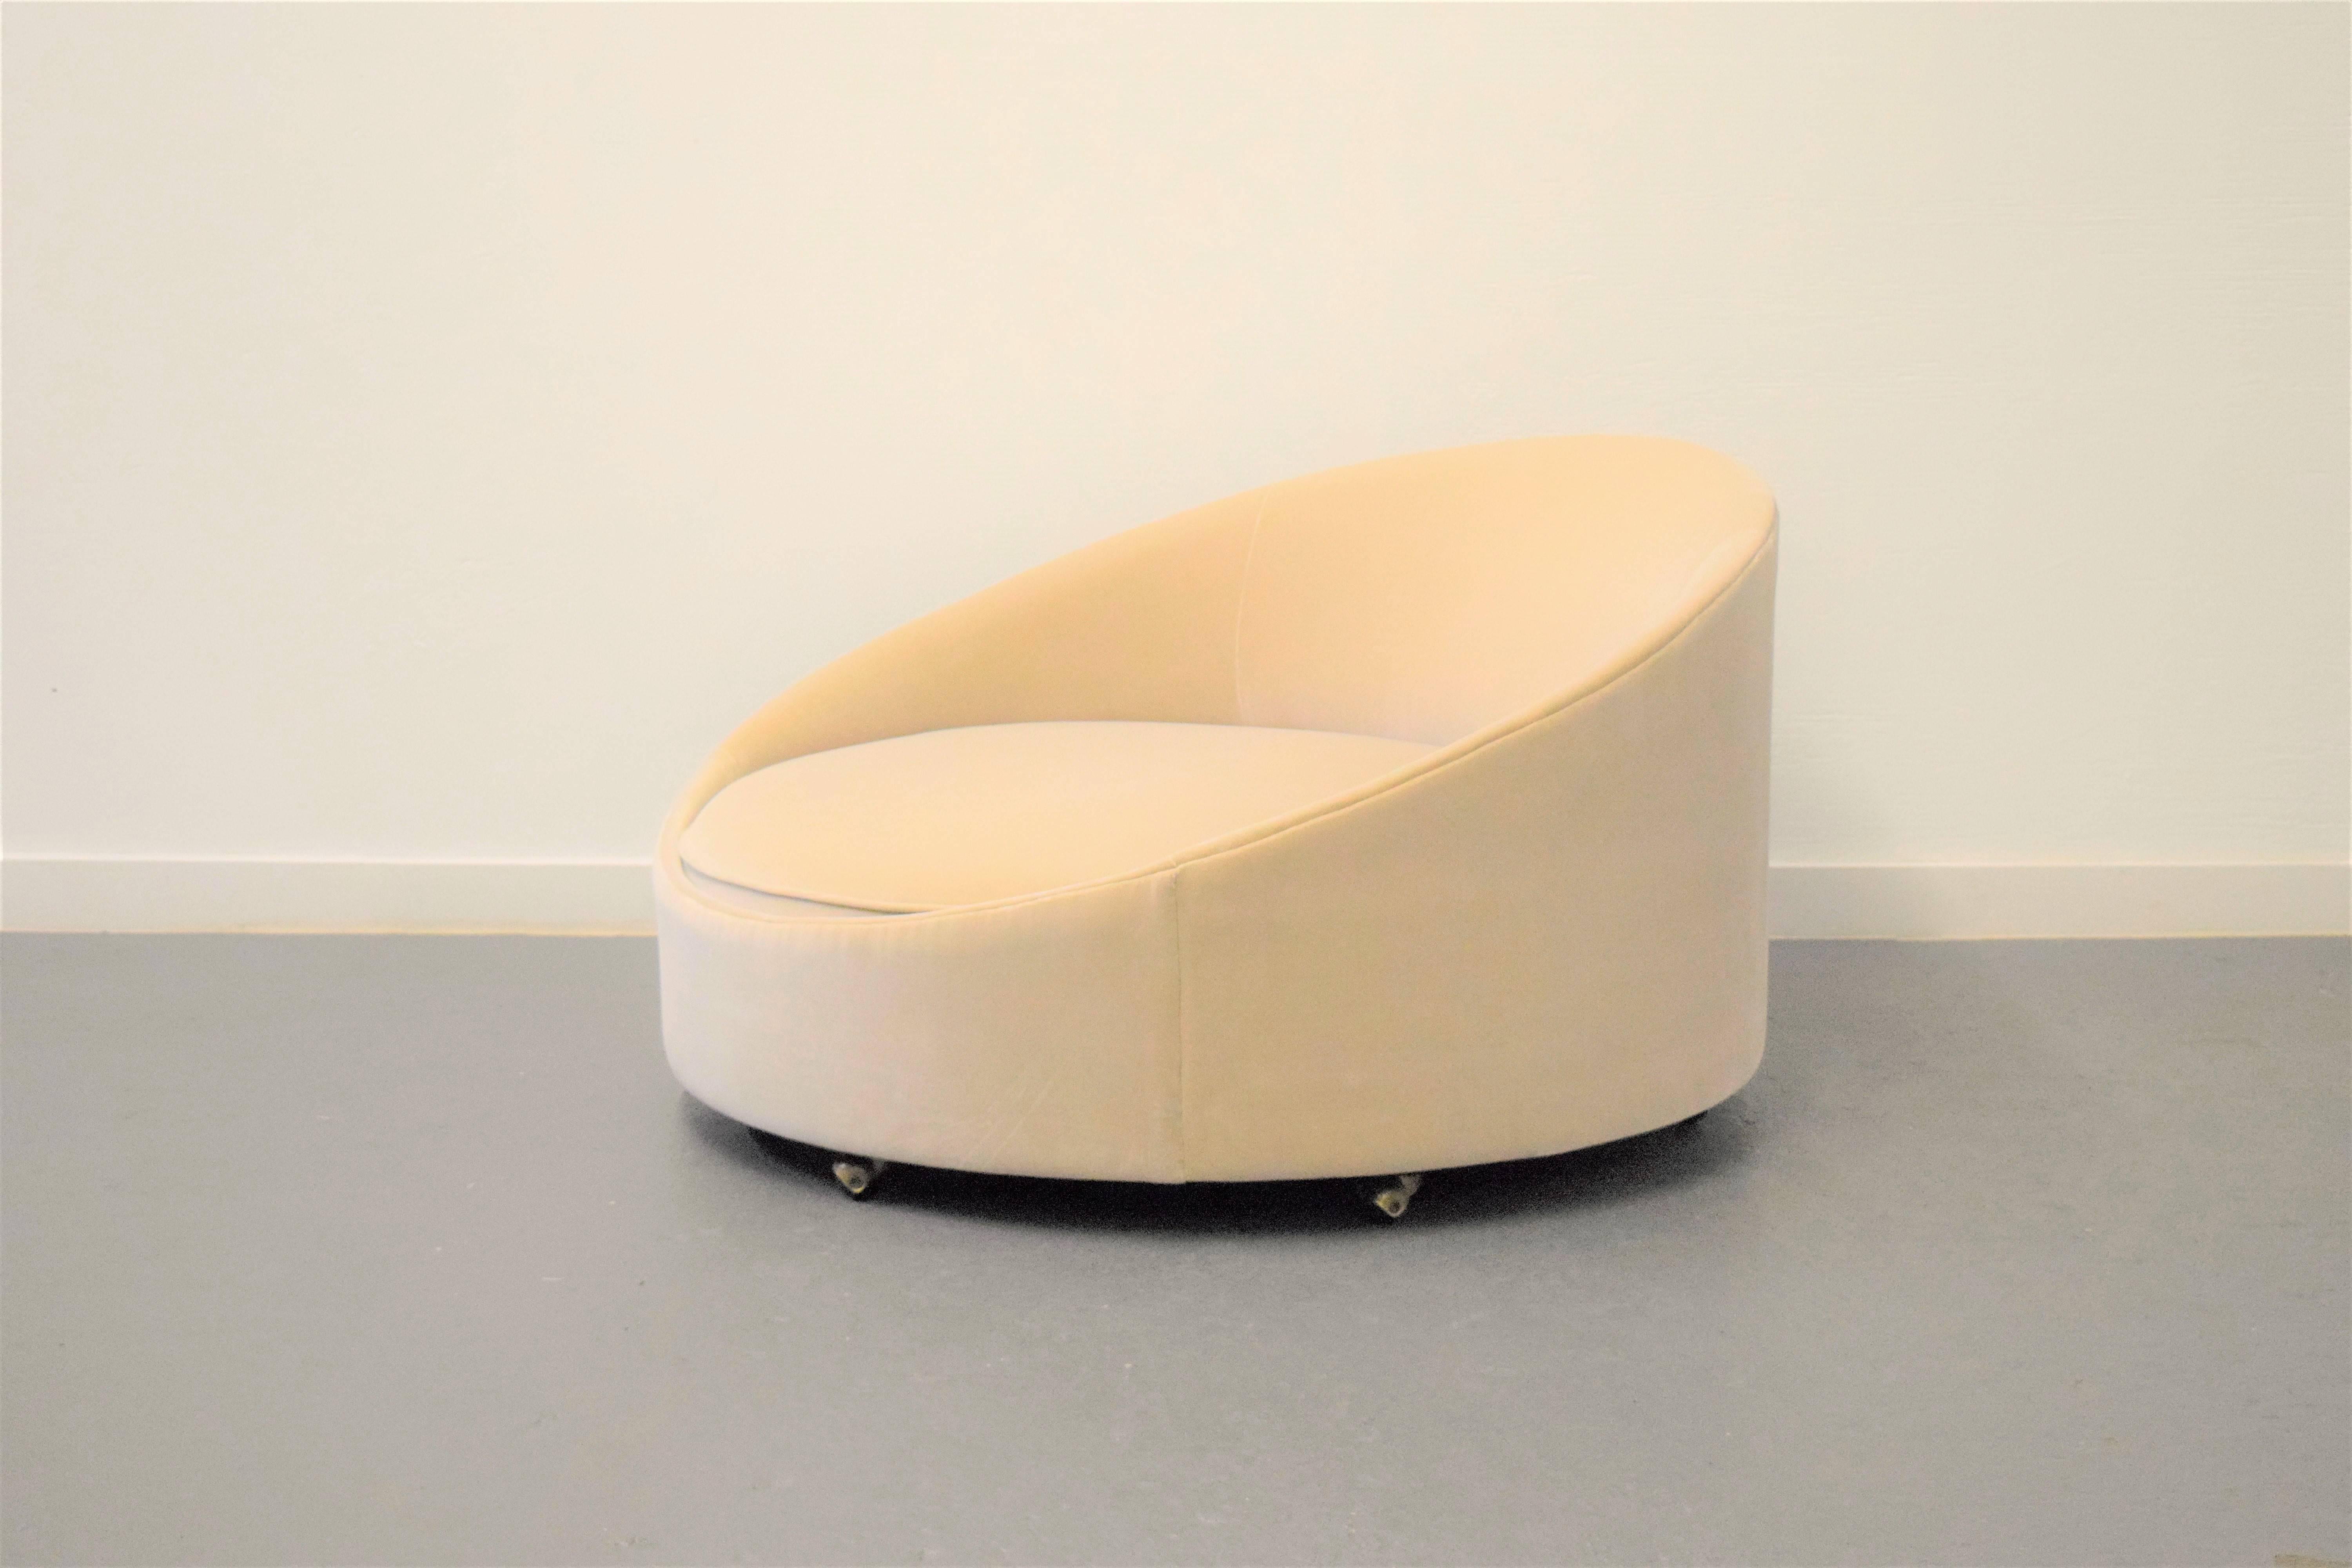 Large Adrian Pearsall lounge chair. Reupholstered in a soft cream velvet. Lounge chair sits on wheels.